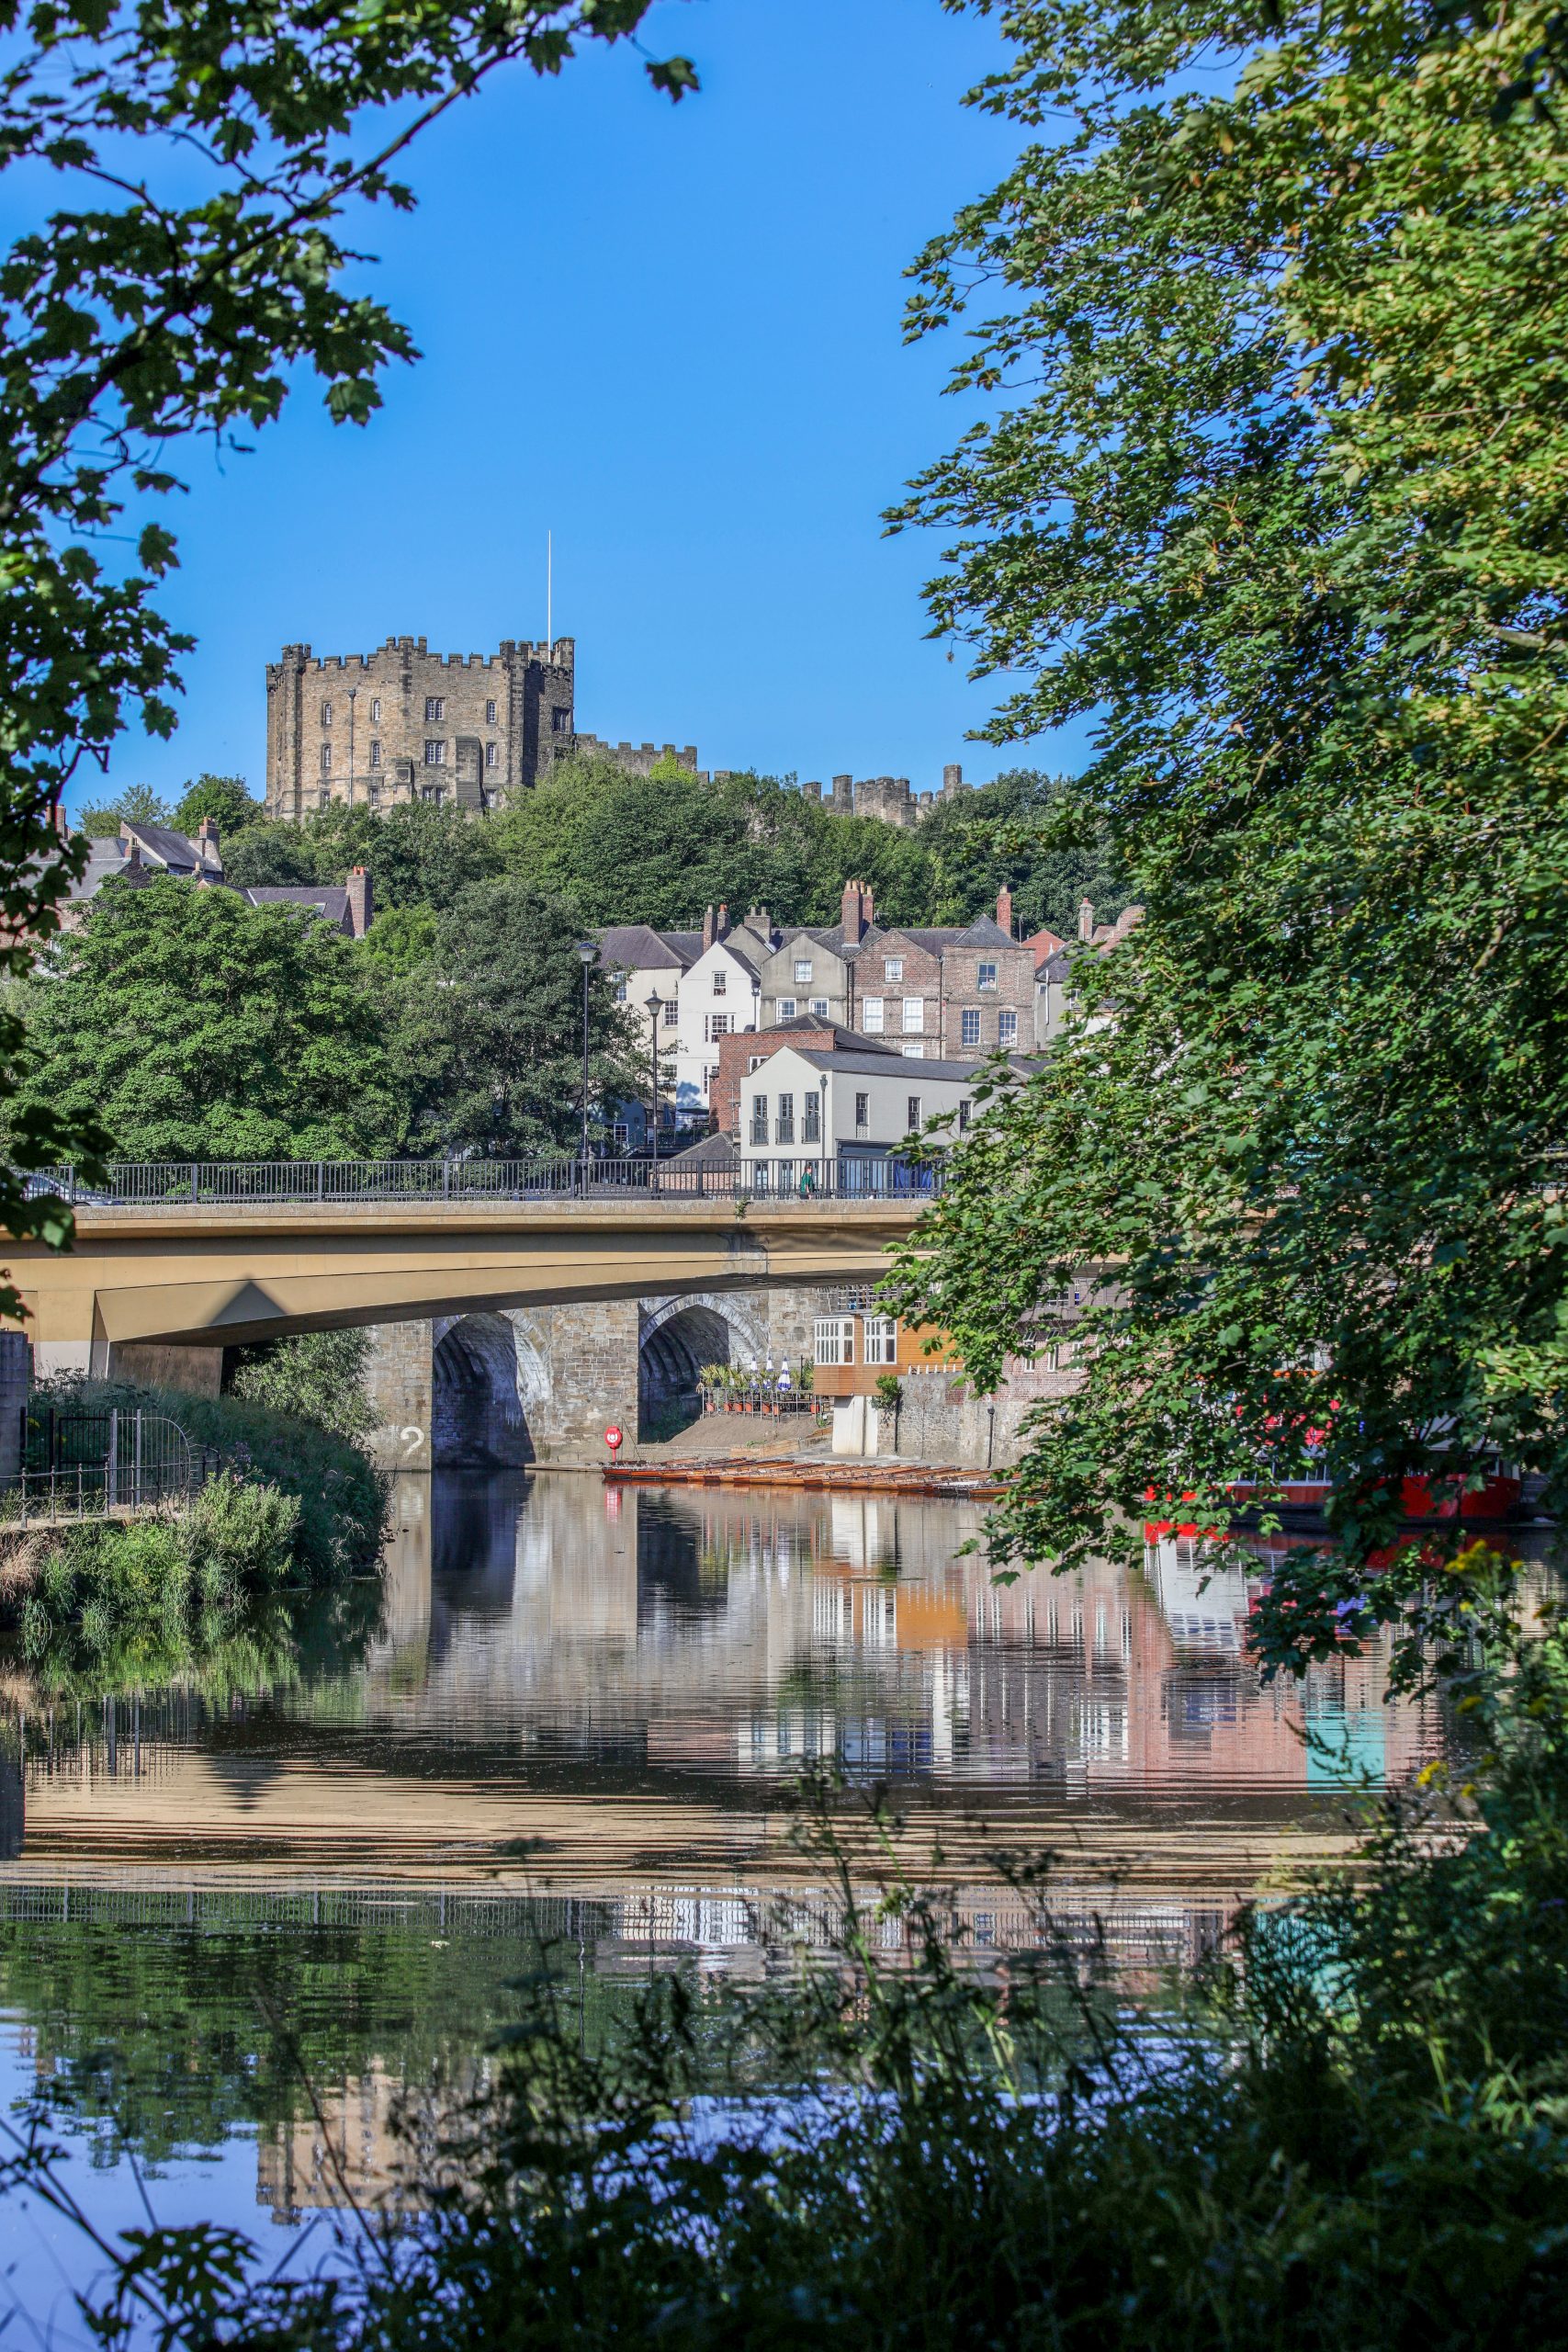 Durham Castle as viewed from the river